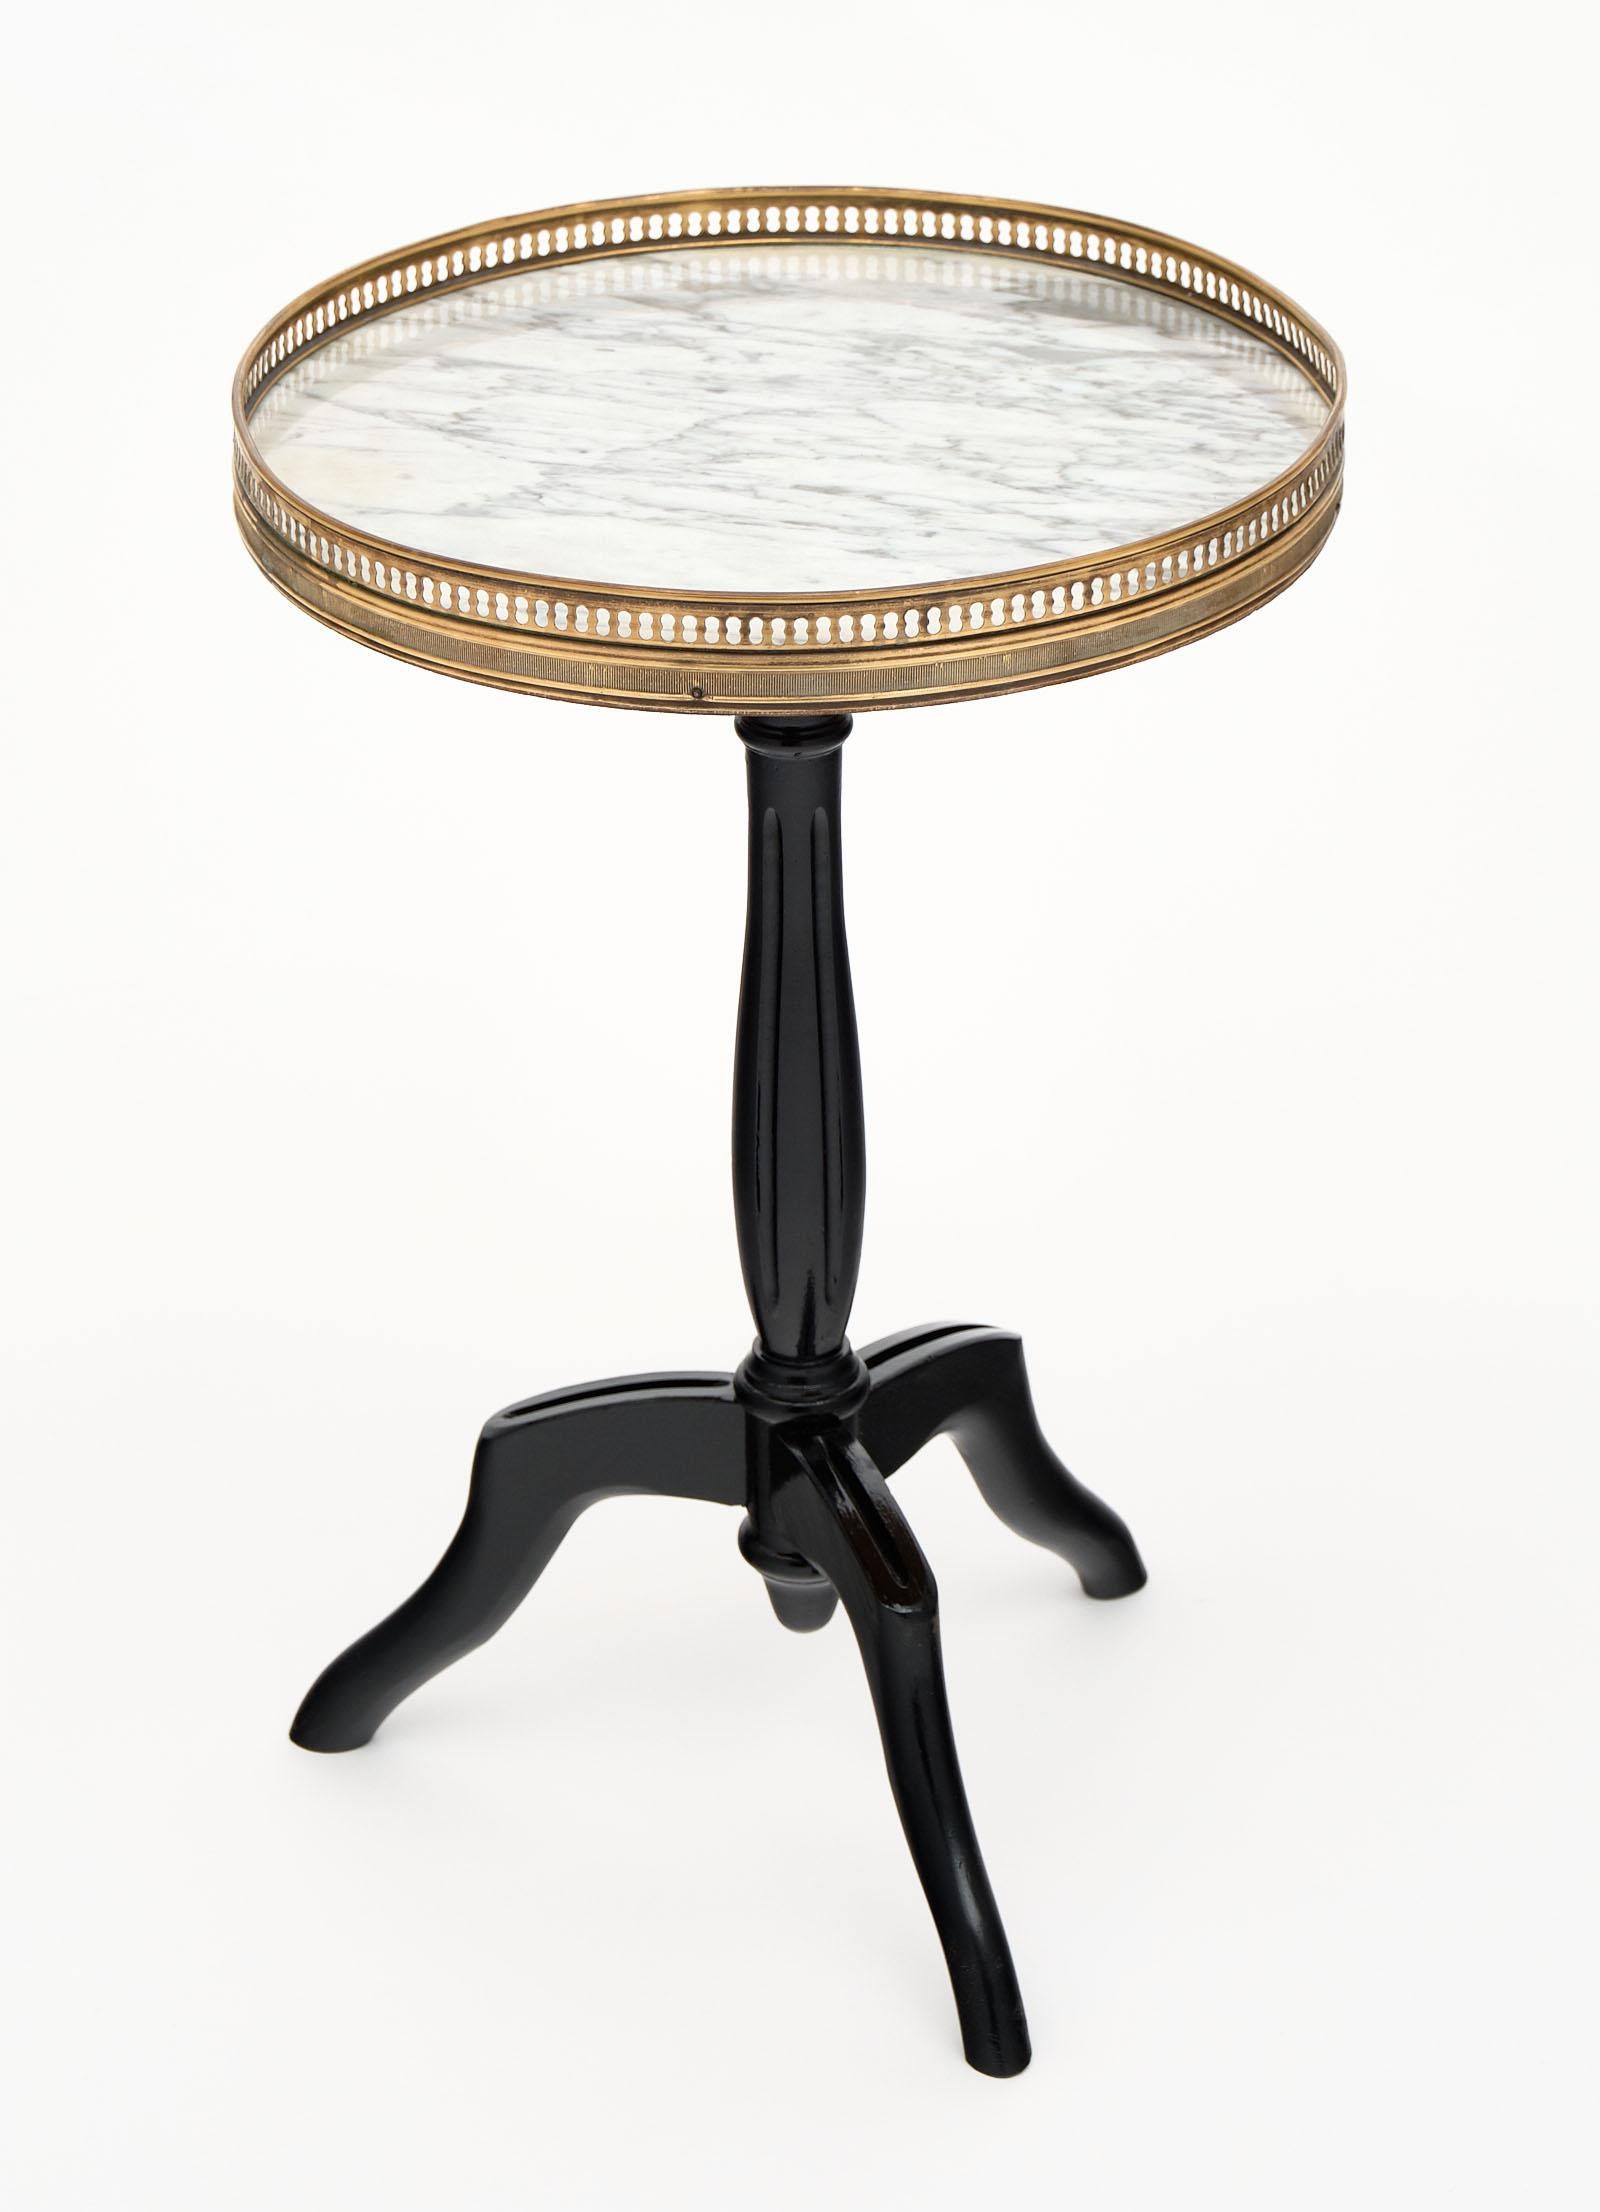 French Louis XVI Style Petite Side Table